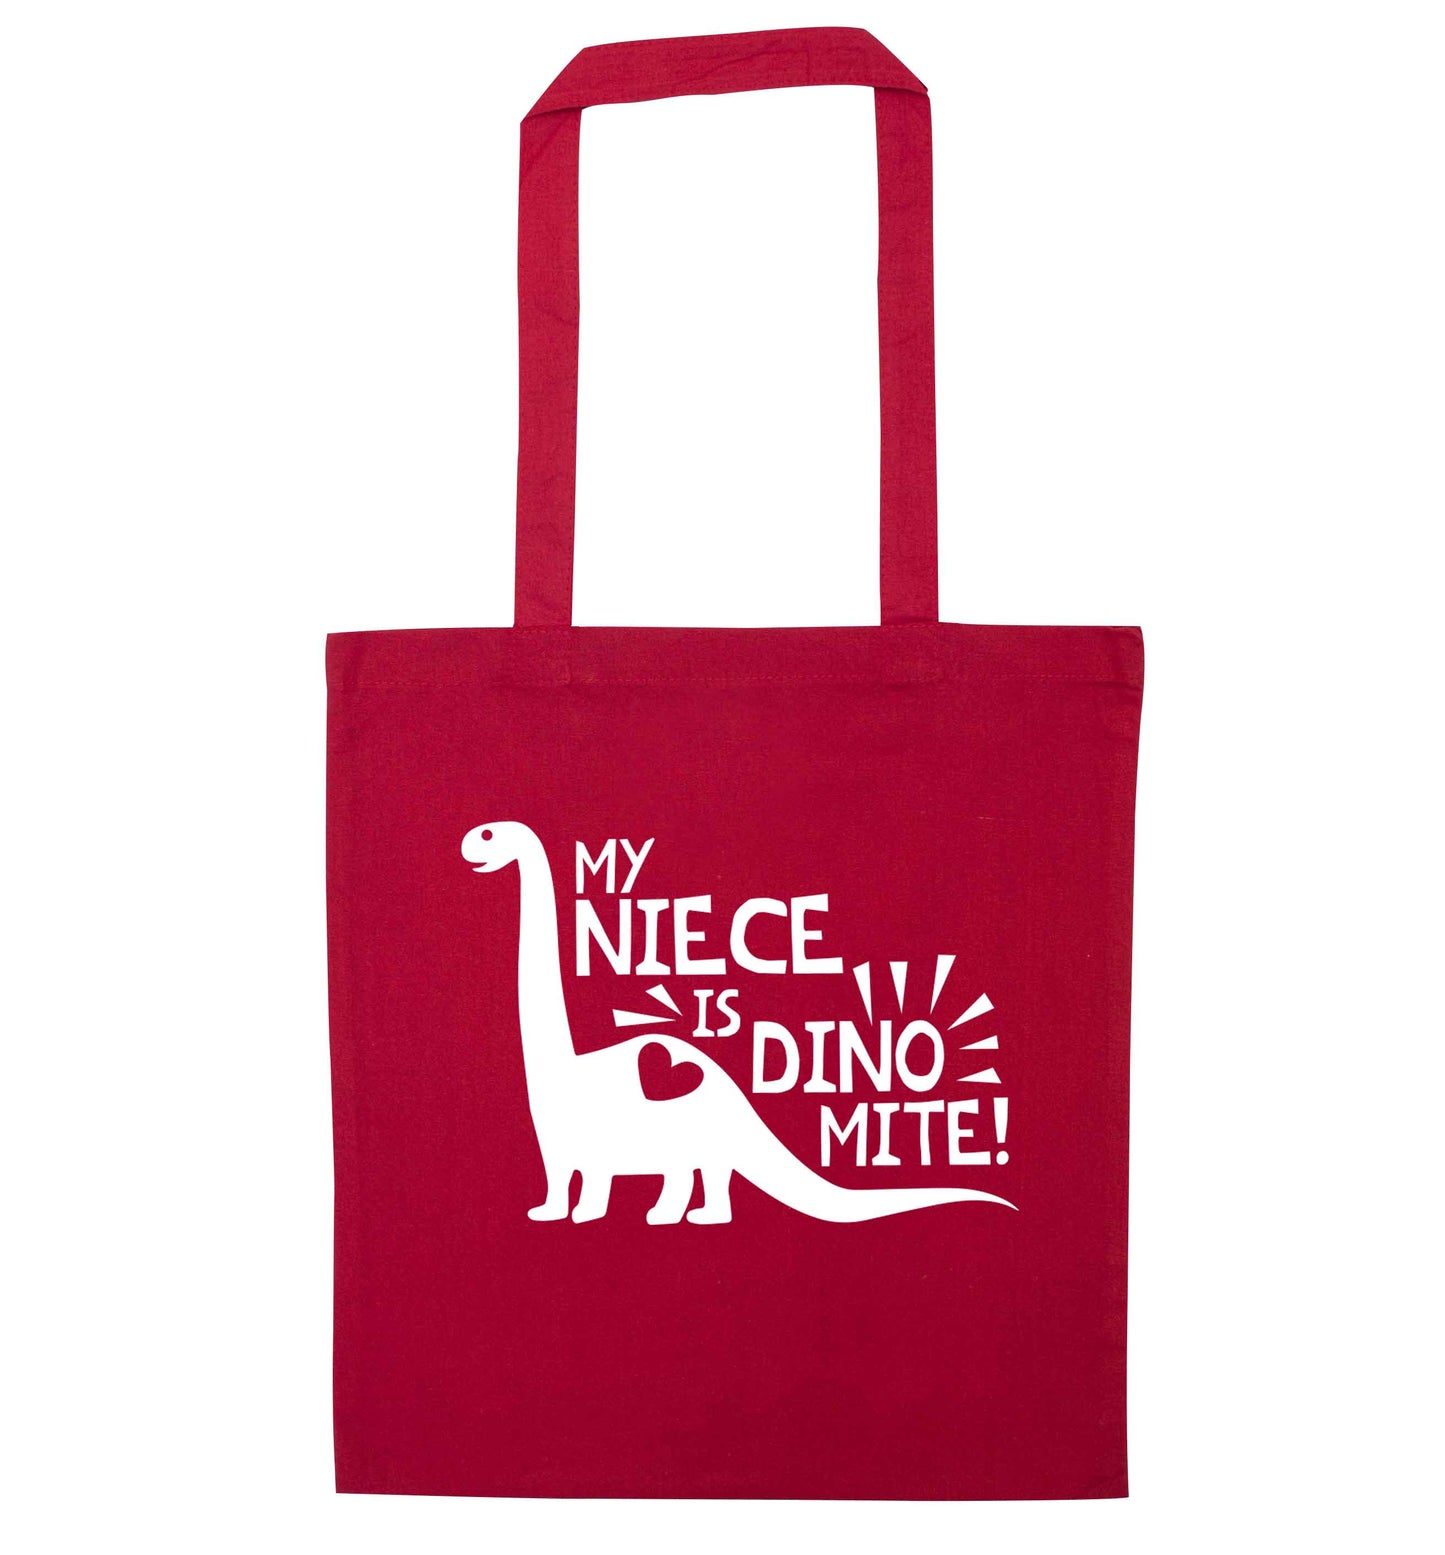 My niece is dinomite! red tote bag